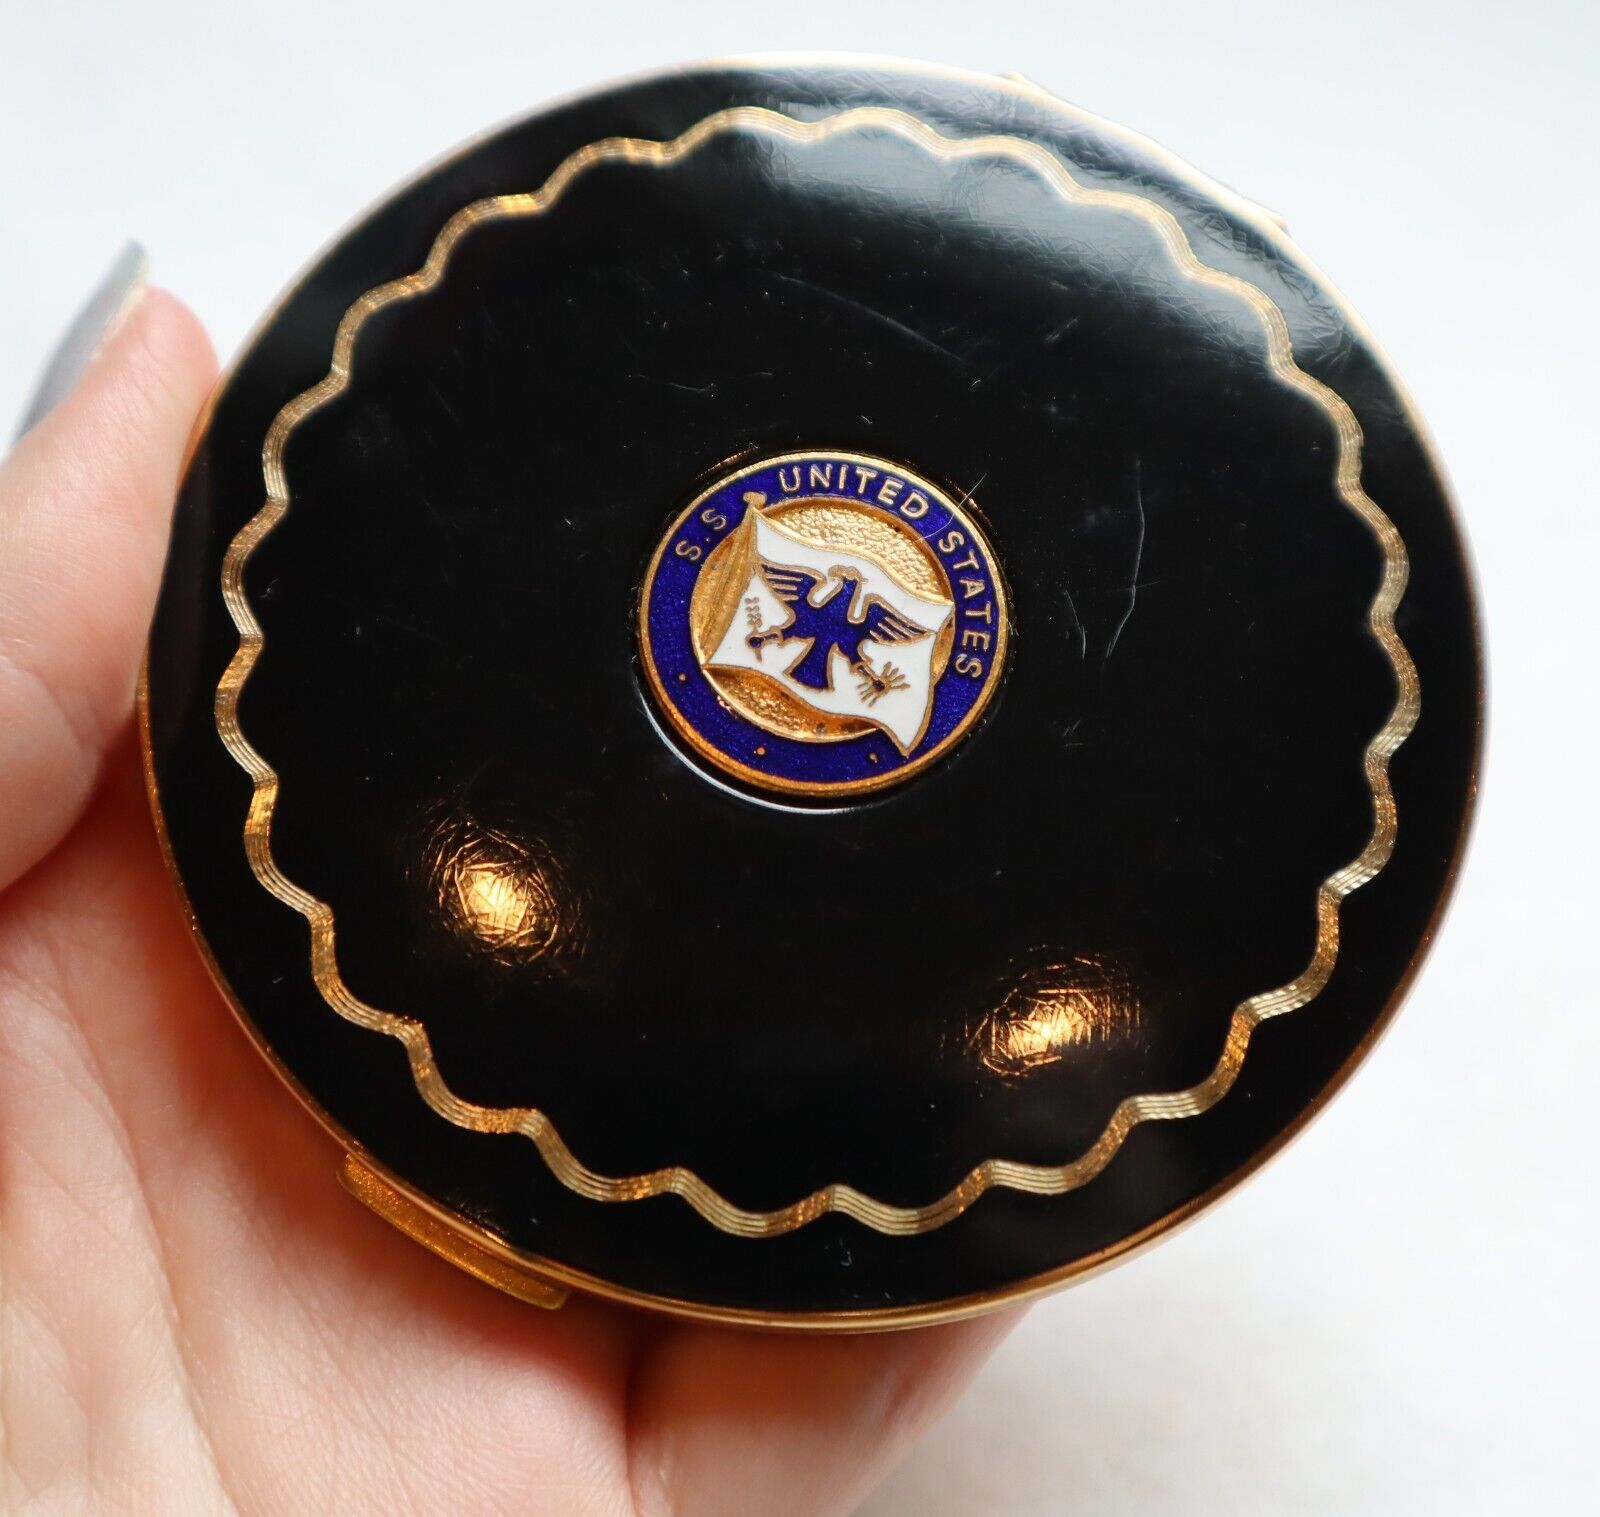 UNUSED Vintage Stratton Compact S.S. United States Ocean Liner Enamel Top w Puff - $74.25